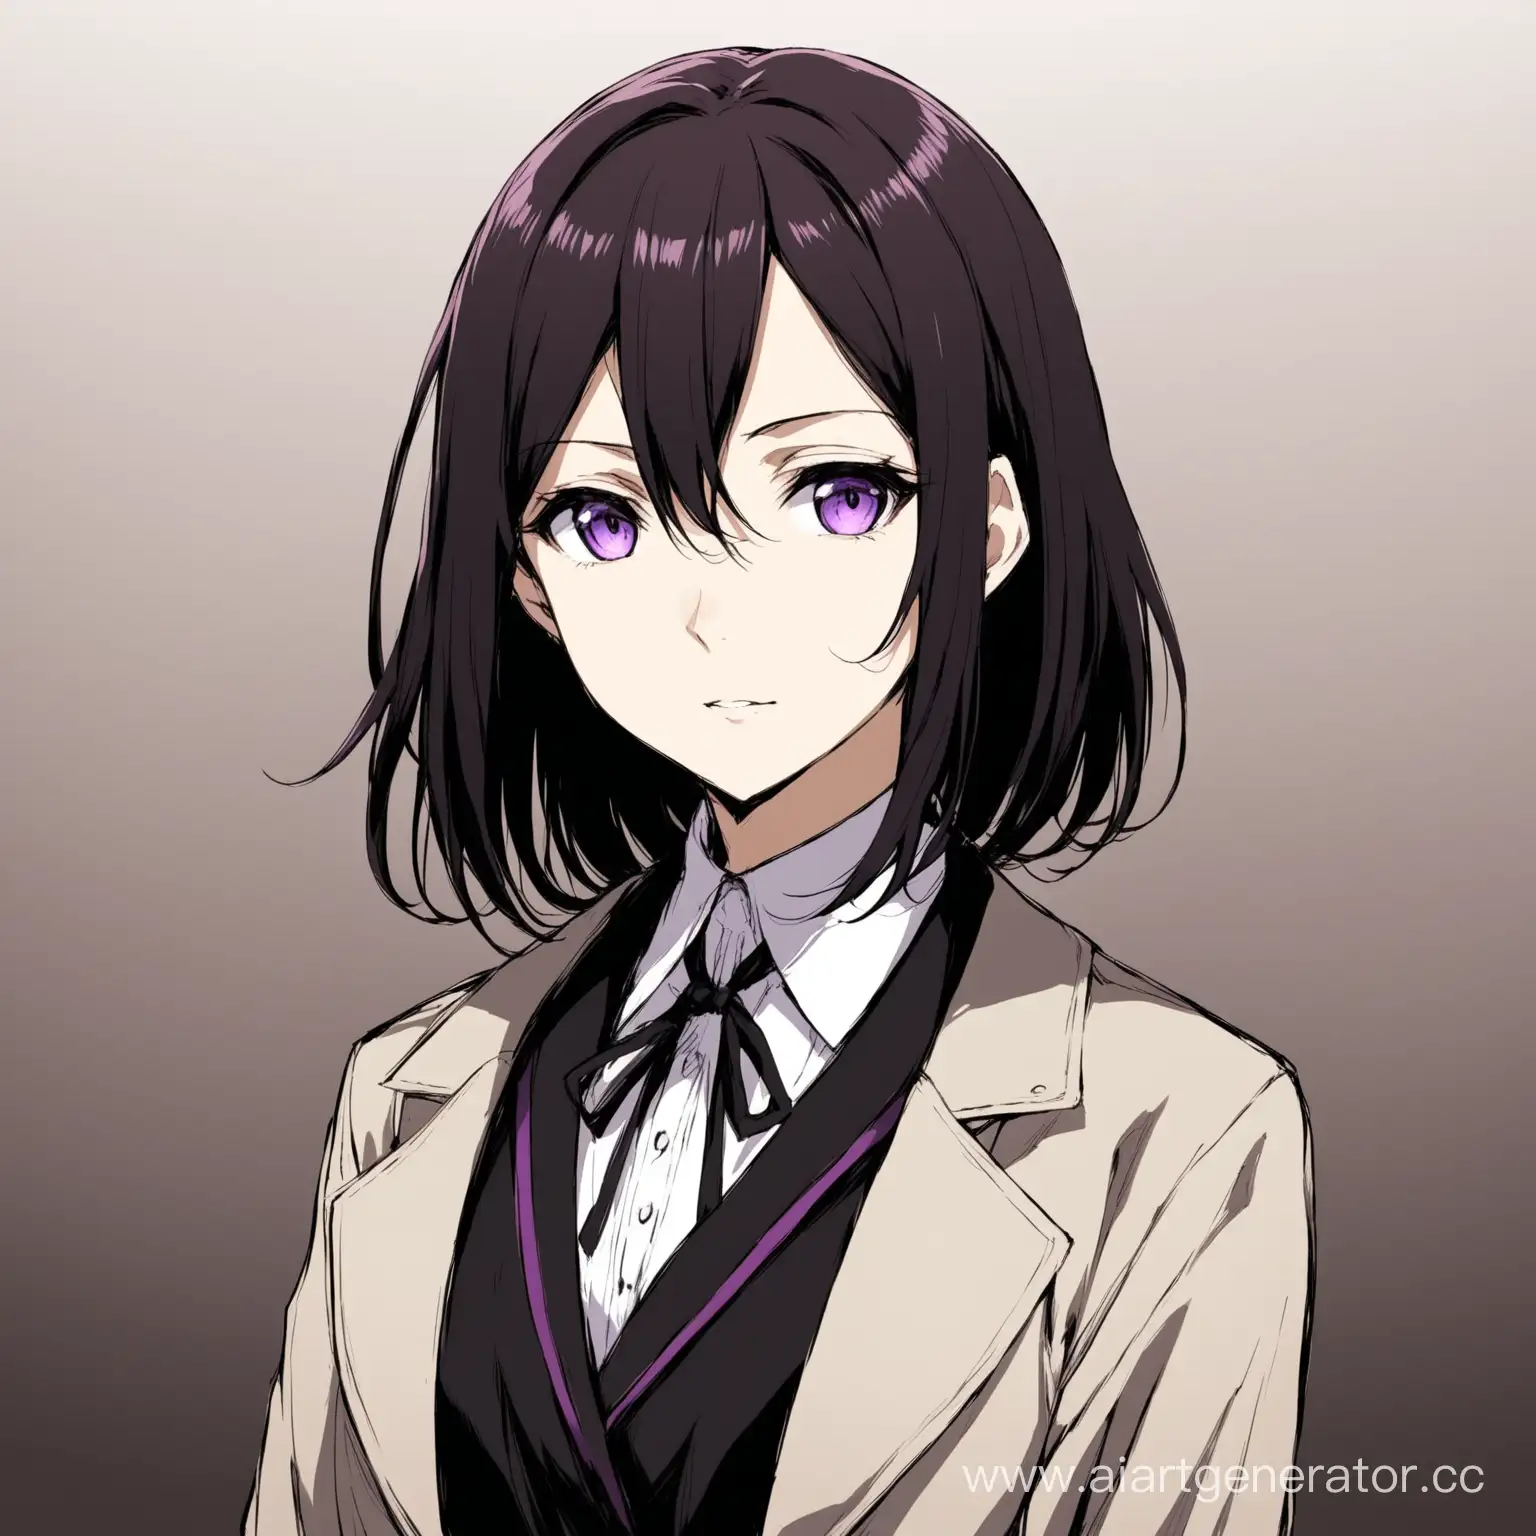 Anime (Bungou Stray Dogs) girl with straight black shoulder-length hair and purple eyes.